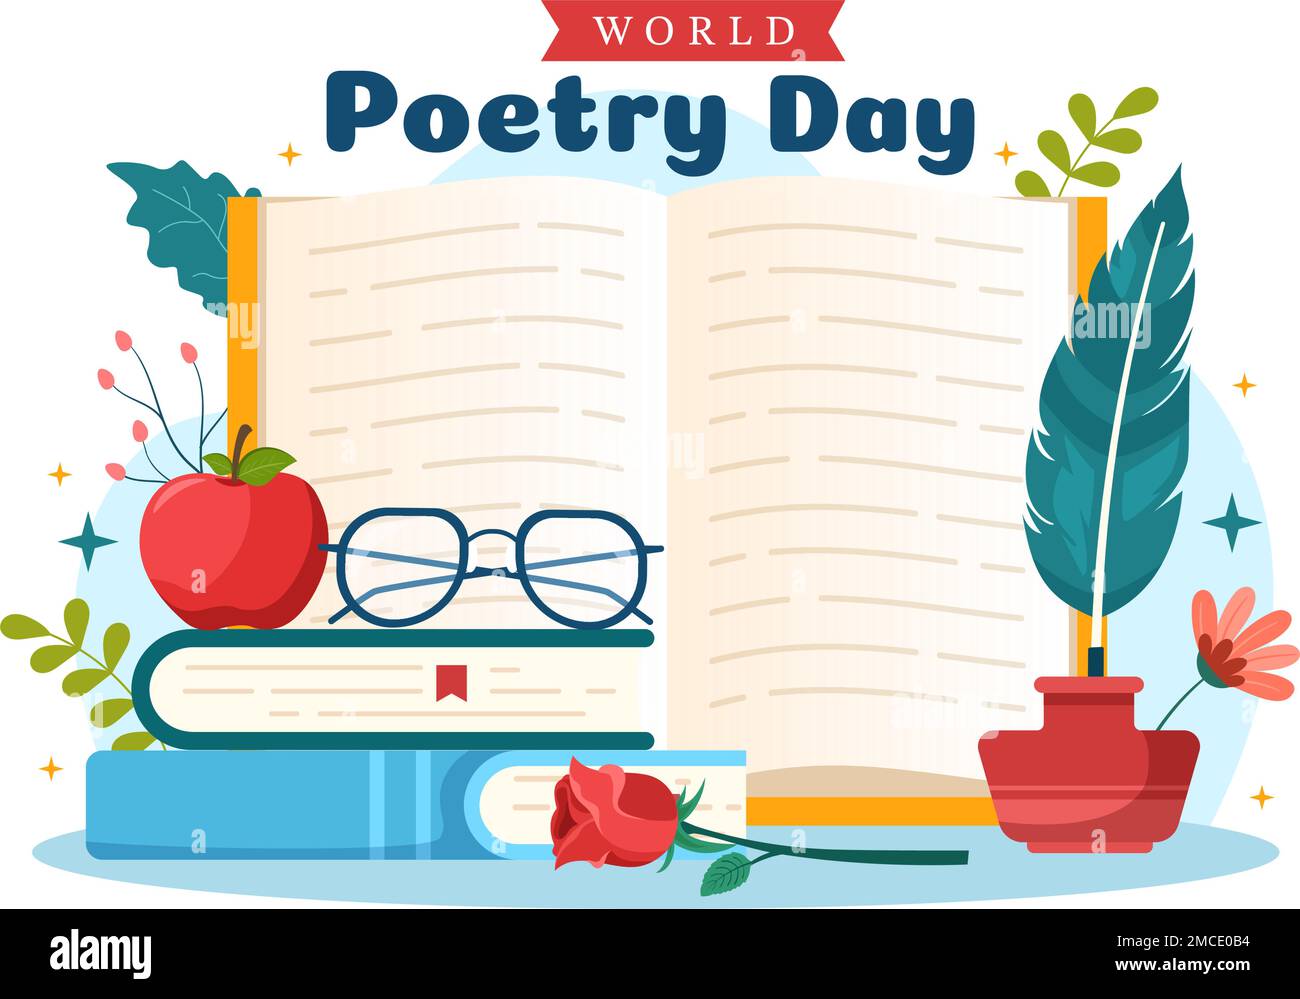 World Poetry Day on March 21 Illustration with a Quill, Paper or Typewriter for Web Banner or Landing Page in Flat Cartoon Hand Drawn Templates Stock Vector